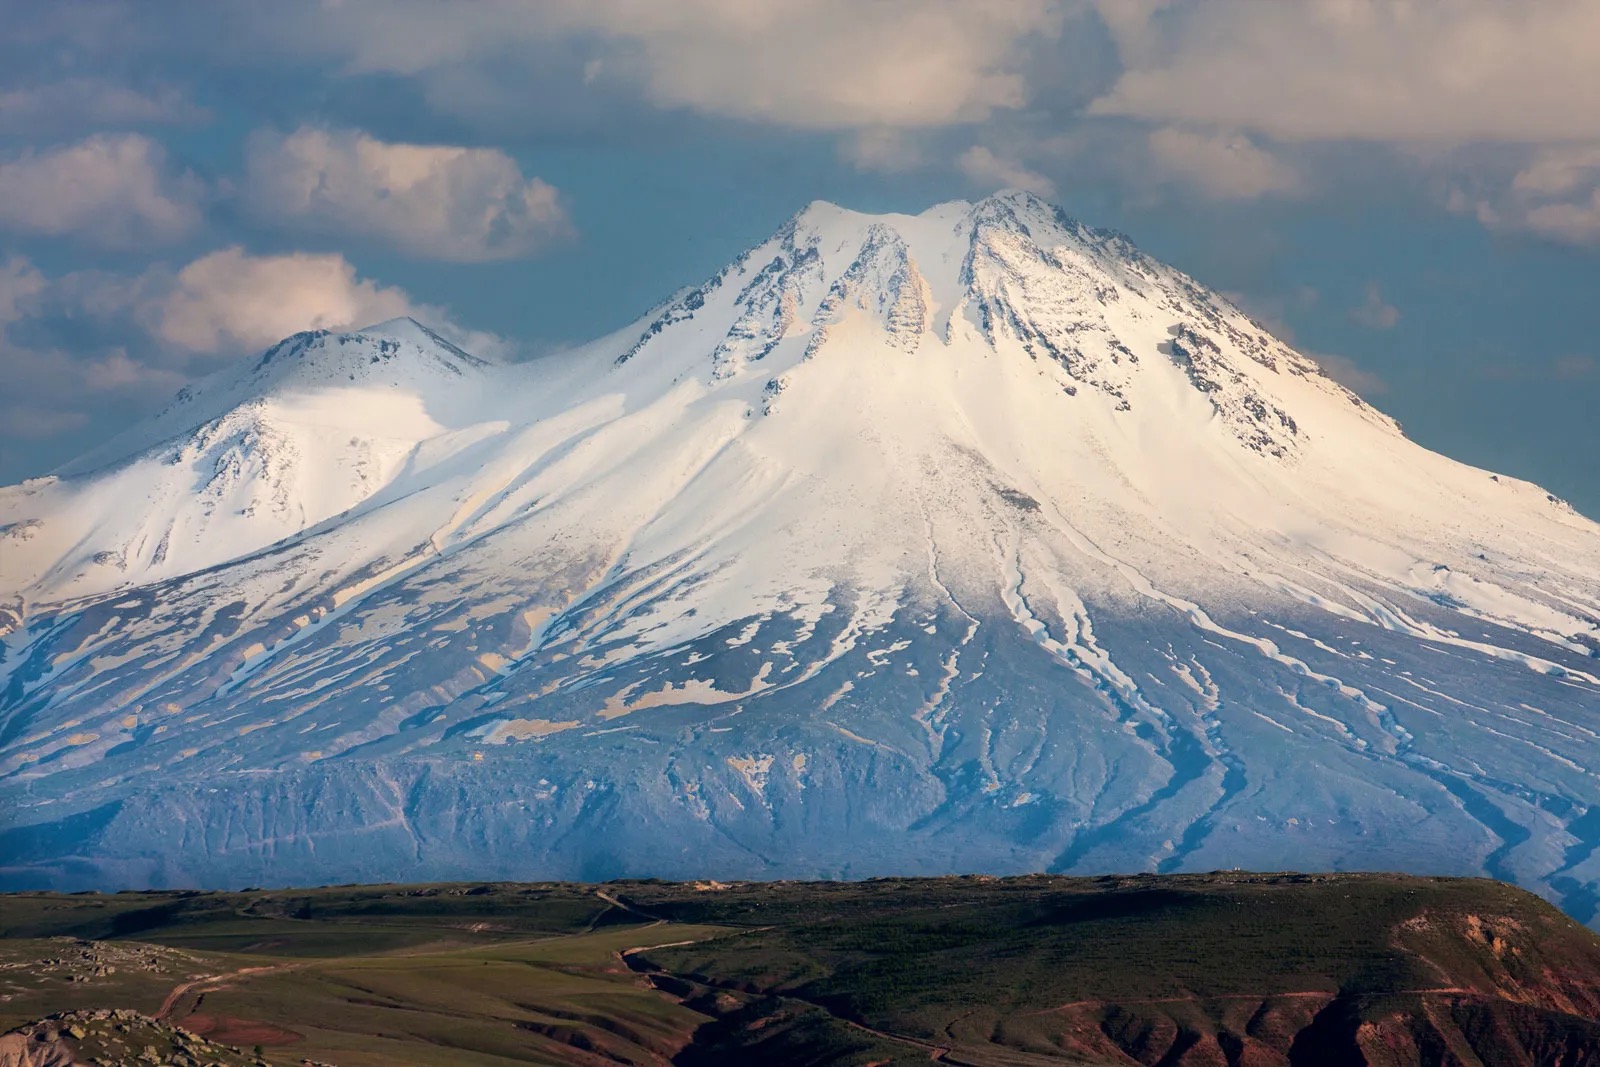 Can You Match These Extraordinary Natural Features to Their Respective Countries? Mount Ararat